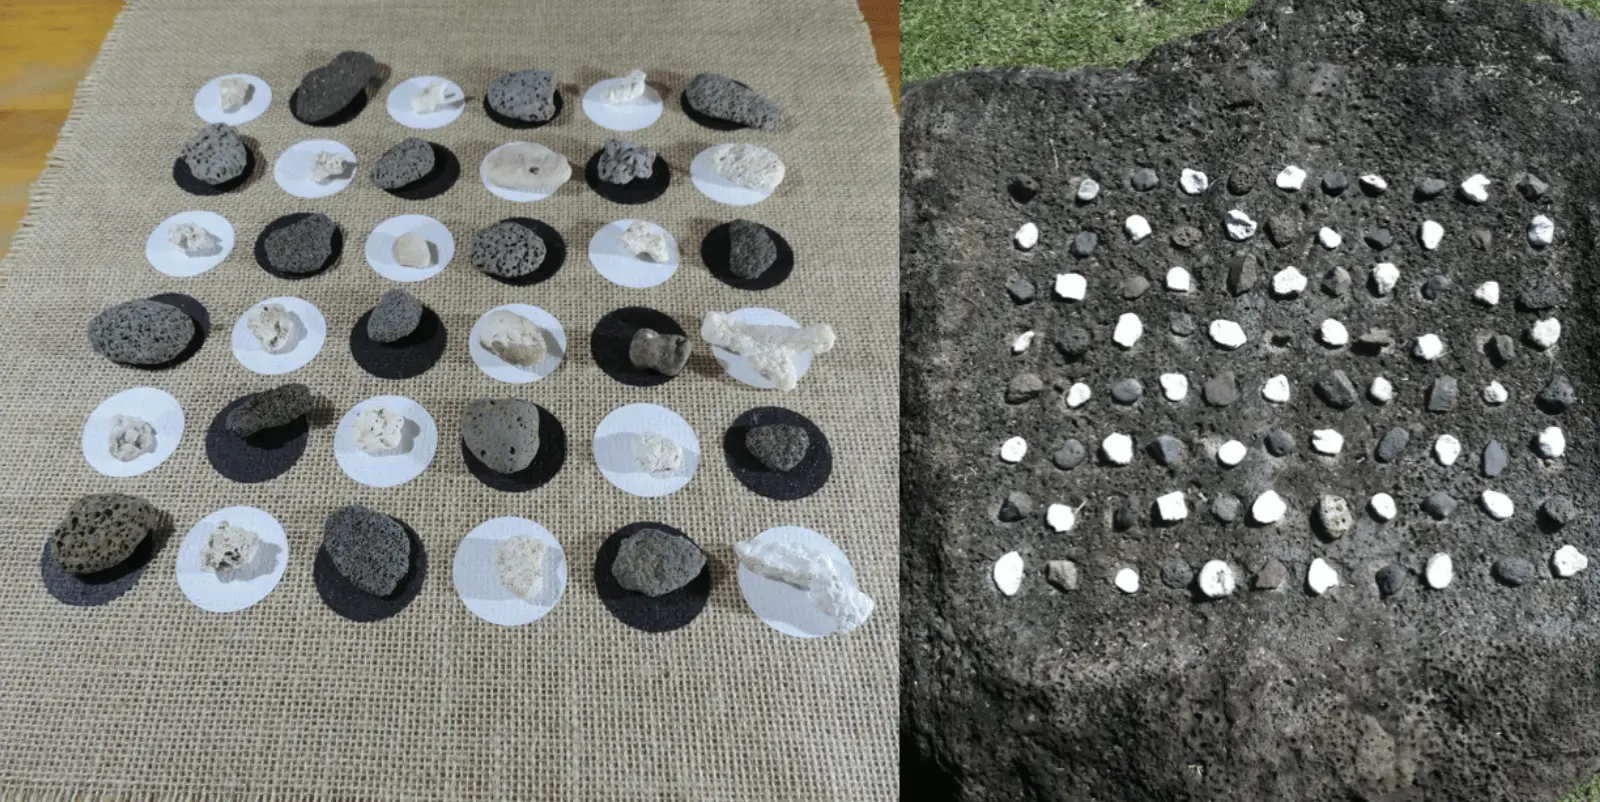 A side-by-side image comparison. The left shows round black and white placeholders with stones on burlap, arranged in a grid. The right, reminiscent of Kauai made craftsmanship, displays similar small stones arranged directly on a large, rough-surfaced rock. Both arrangements form a similar grid pattern.